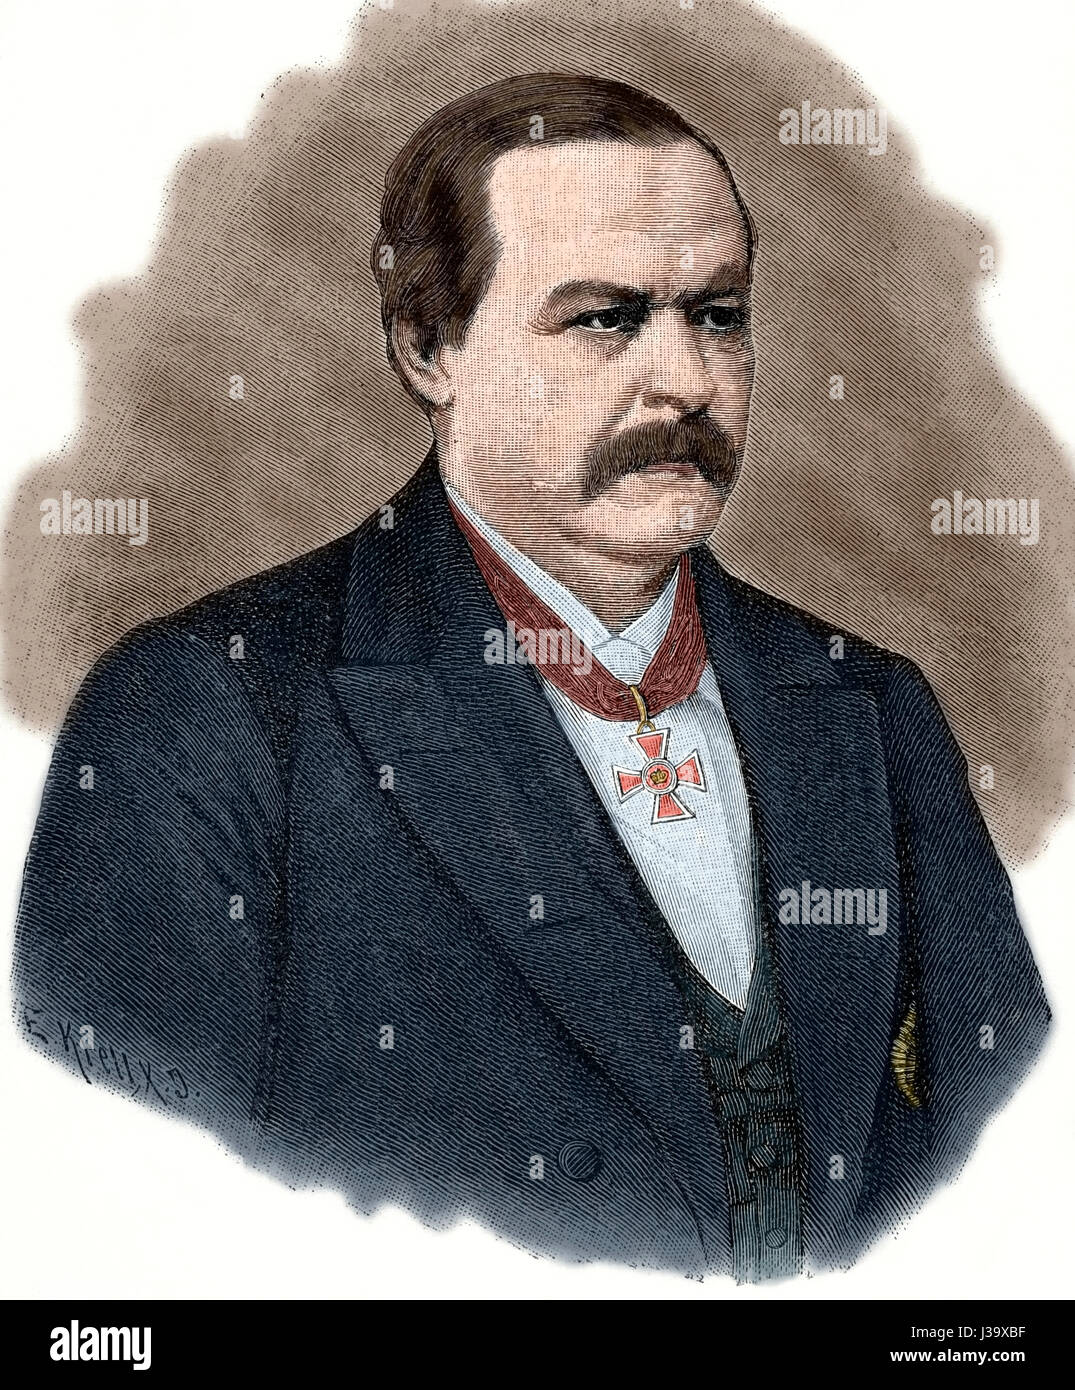 Max von Forckenbeck(1821-1892). Lawyer and German politician. Mayor of Berlin from 1878-1892. One of the founders of the Liberal National party. Portrait. Engraving by E. Krell. 'Historia Universal', 1883. Colored. Stock Photo